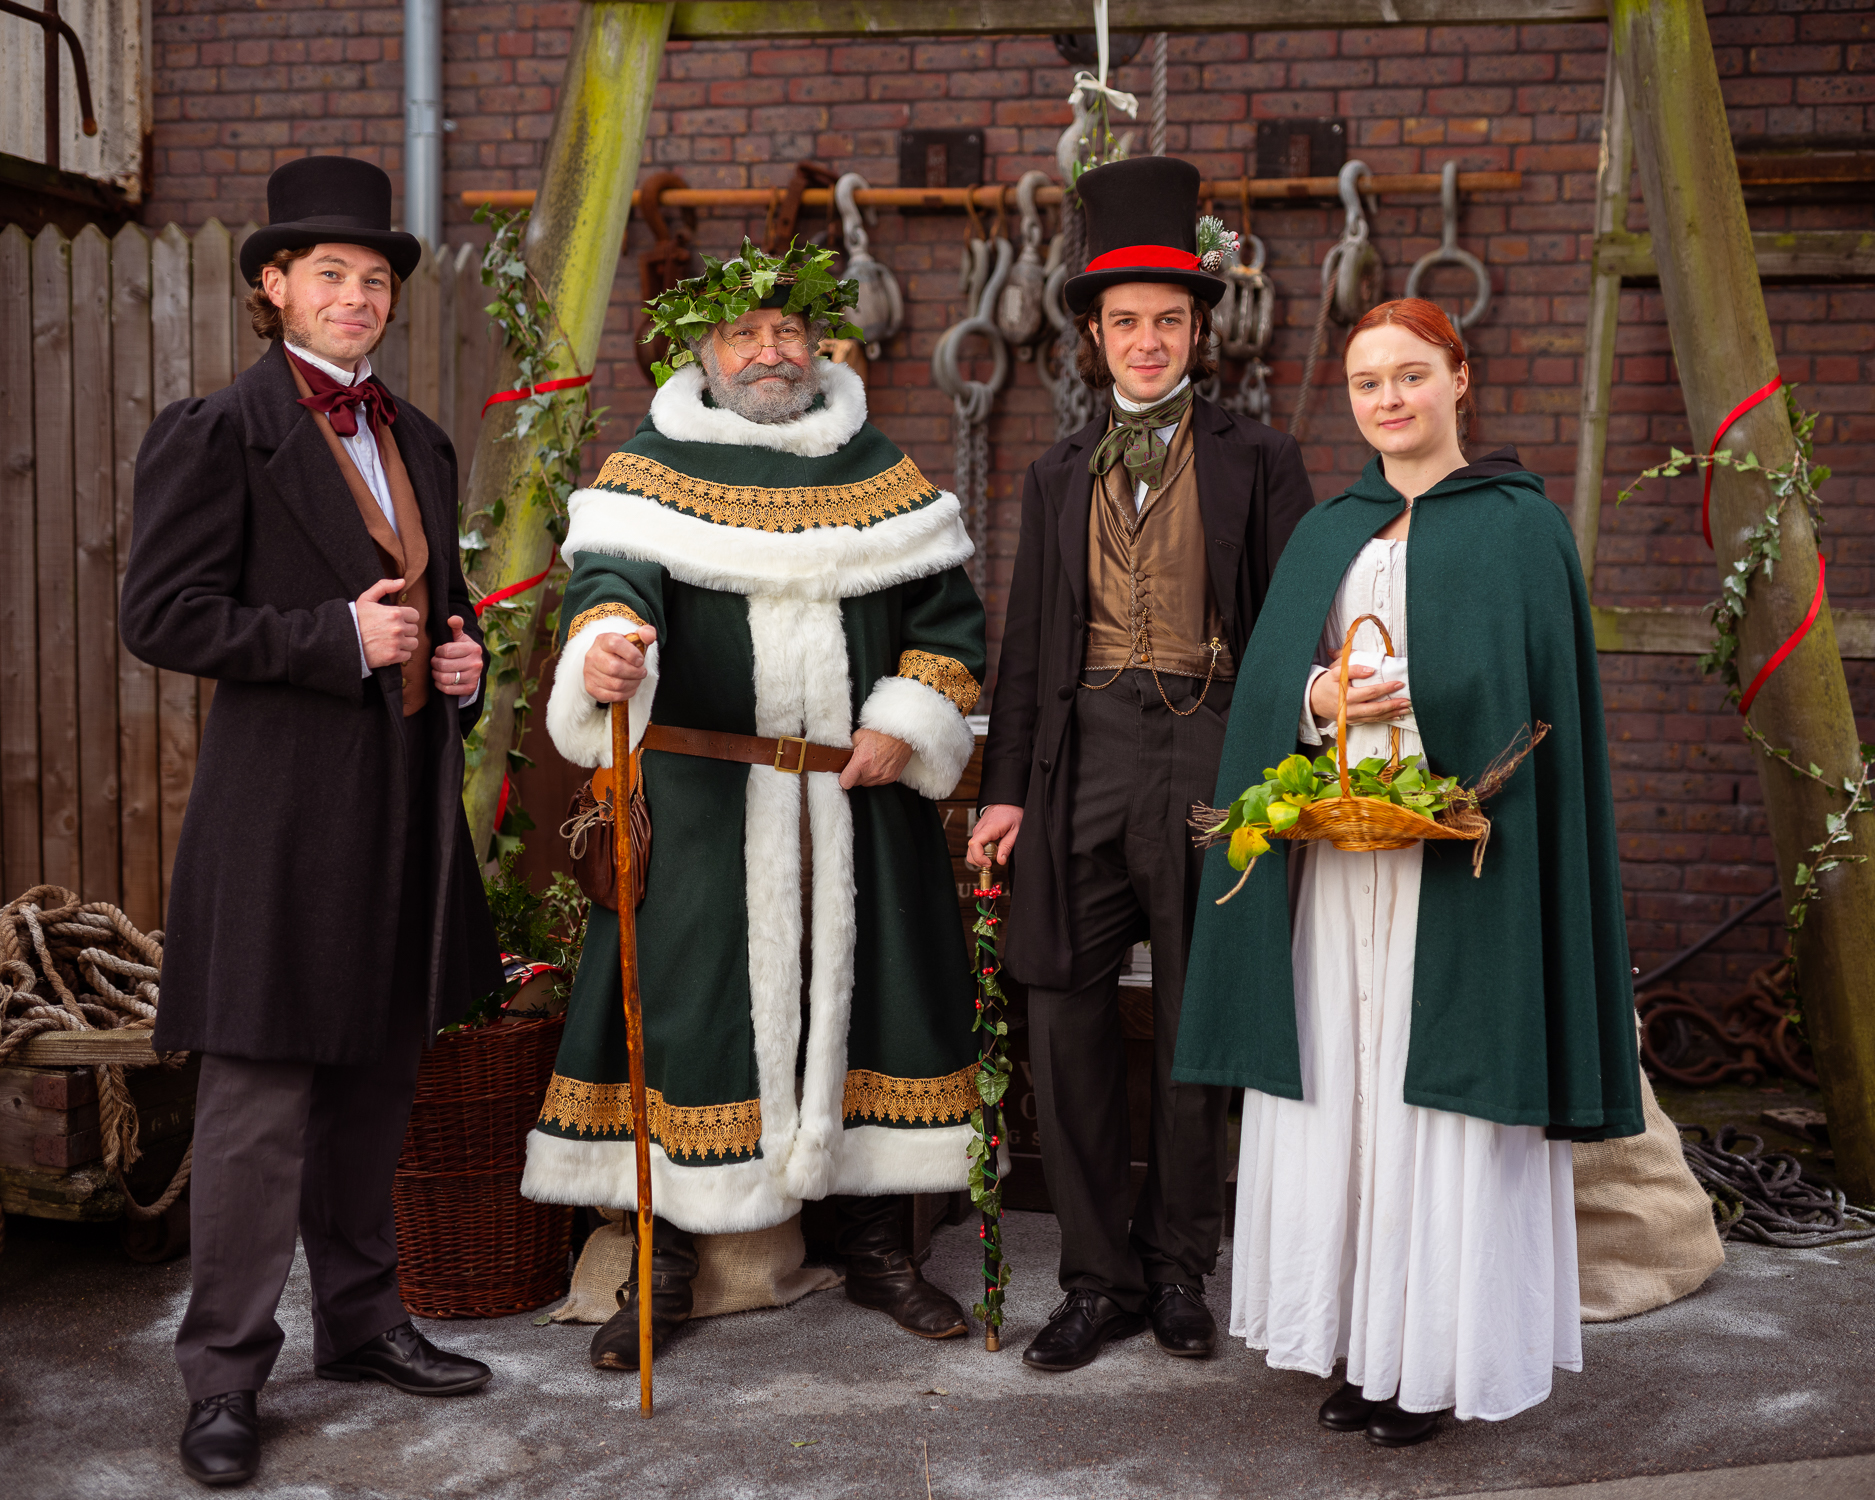 SS Great Britain Victorian Christmas in the dockyard.